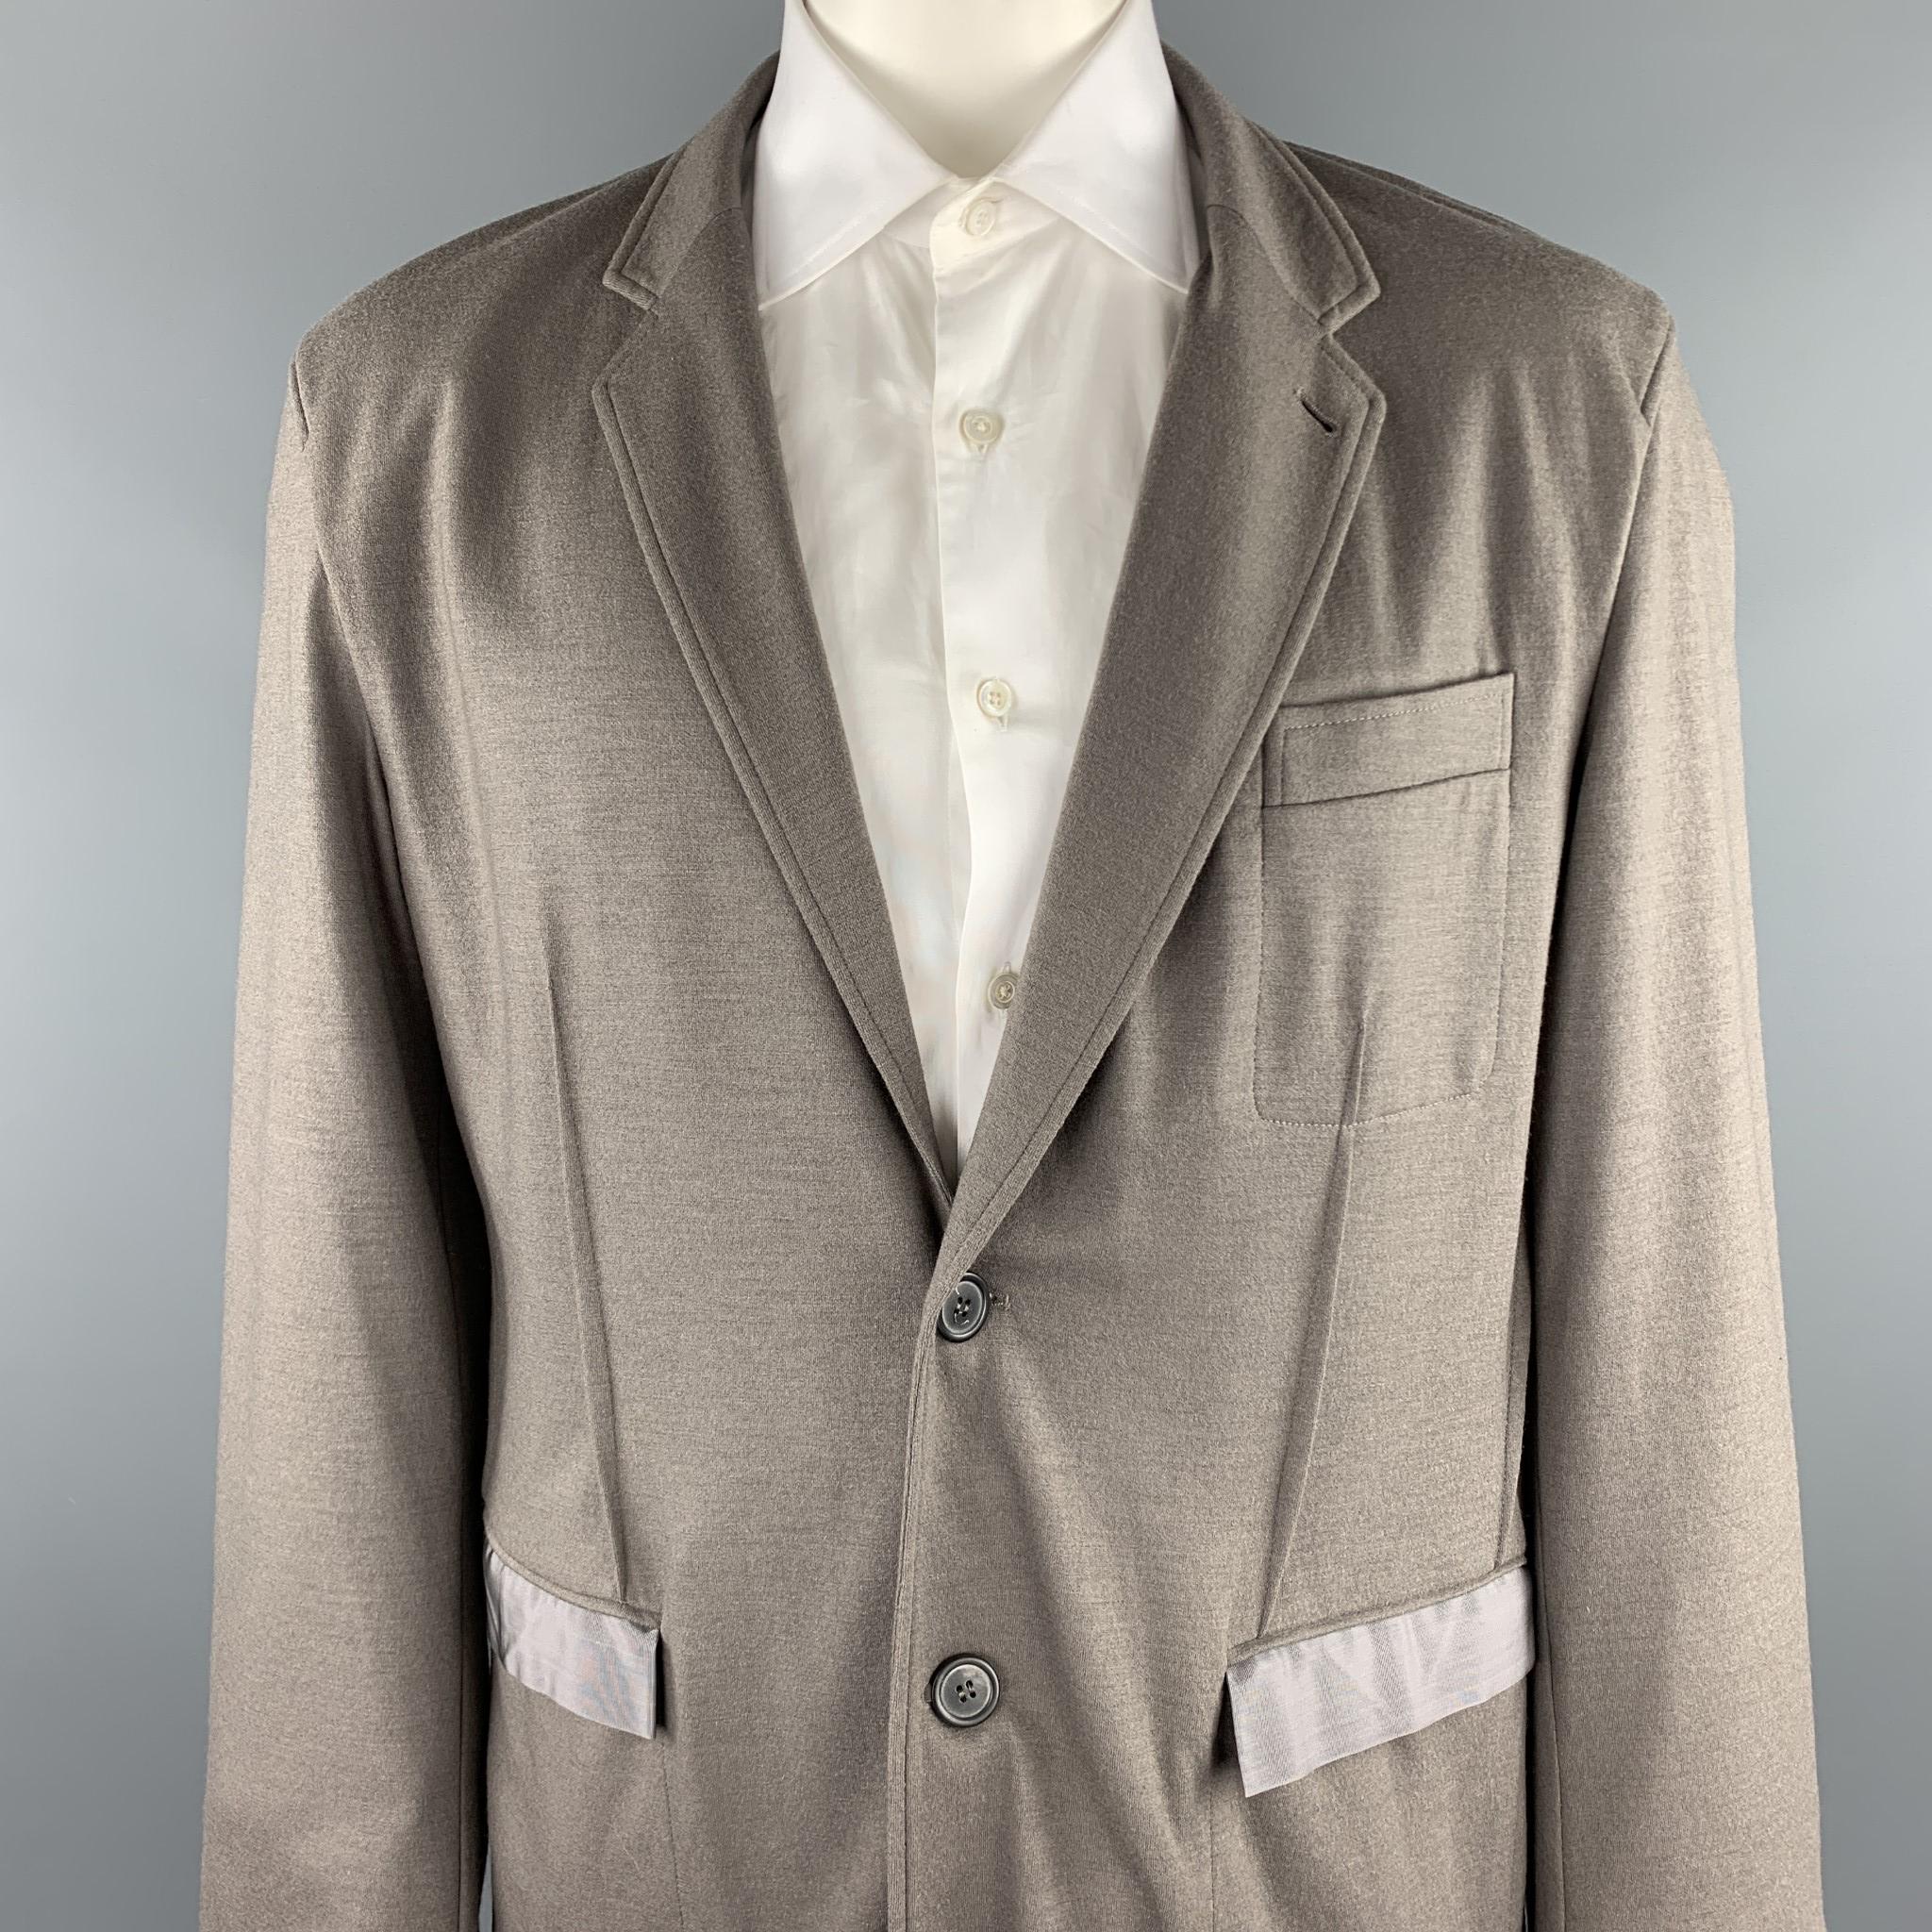 LANVIN sport coat comes in a taupe wool / cashmere with no liner featuring a notch lapel, flap pockets, and a two button closure. Made in Romania.

Very Good Pre-Owned Condition.
Marked: No size marked

Measurements:

Shoulder: 20 in. 
Chest: 44 in.